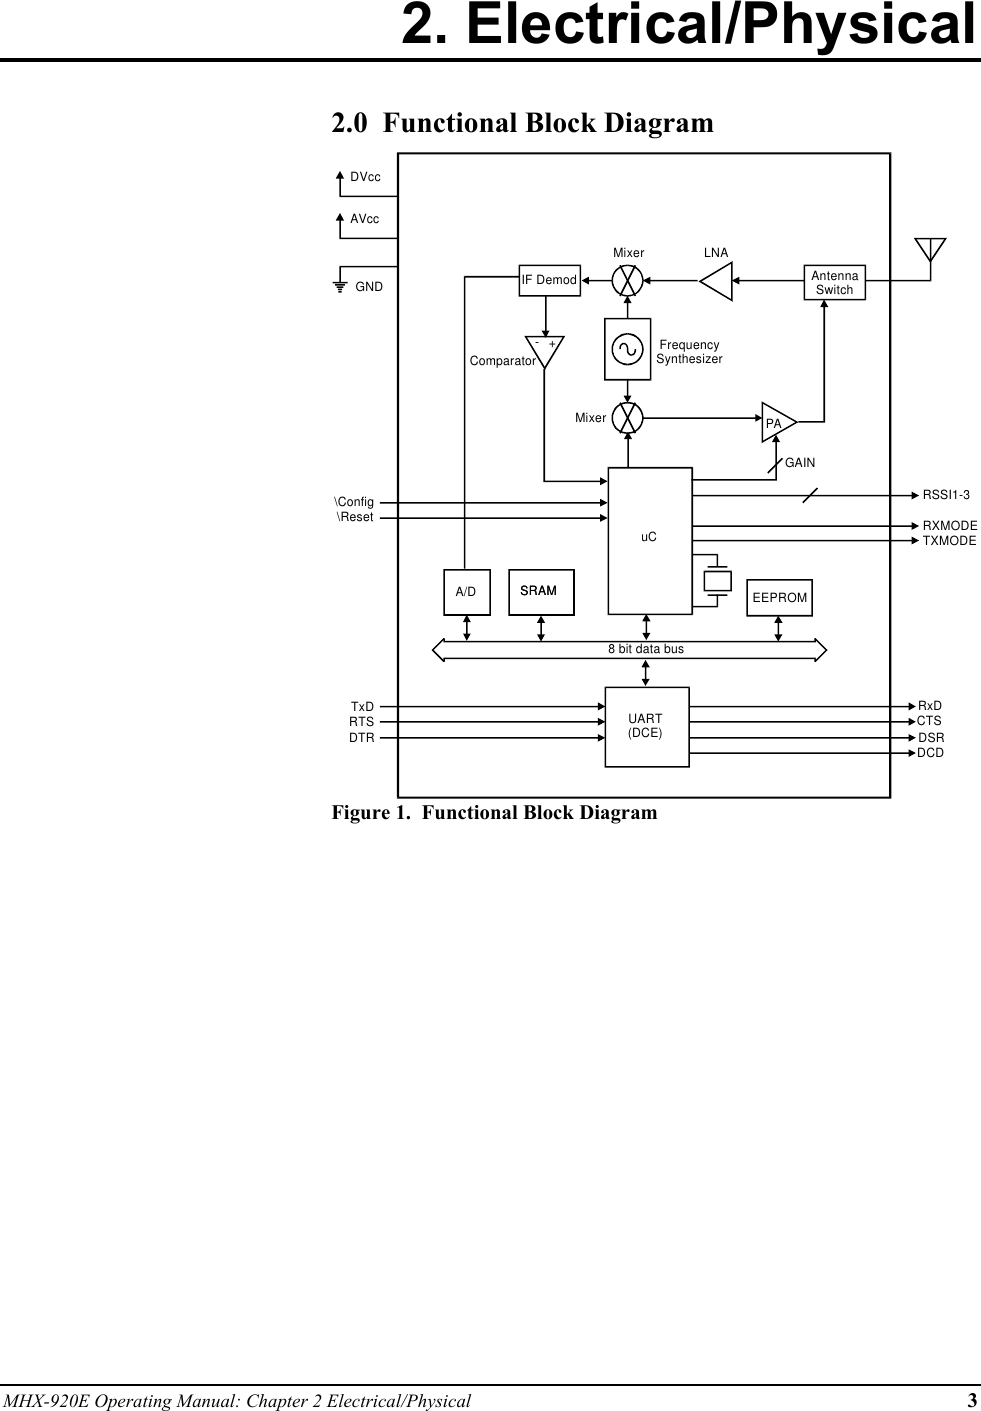 MHX-920E Operating Manual: Chapter 2 Electrical/Physical 32. Electrical/Physical2.0  Functional Block DiagramAntennaSwitchMixerLNAMixerIF DemodFrequencySynthesizerPAComparator+-uC8 bit data busUART(DCE)GAINA/D SRAM EEPROMSRAMCTSDCDDSRRxDDTRTxDRTS\Config\ResetRSSI1-3RXMODETXMODEDVccAVccGNDFigure 1.  Functional Block Diagram